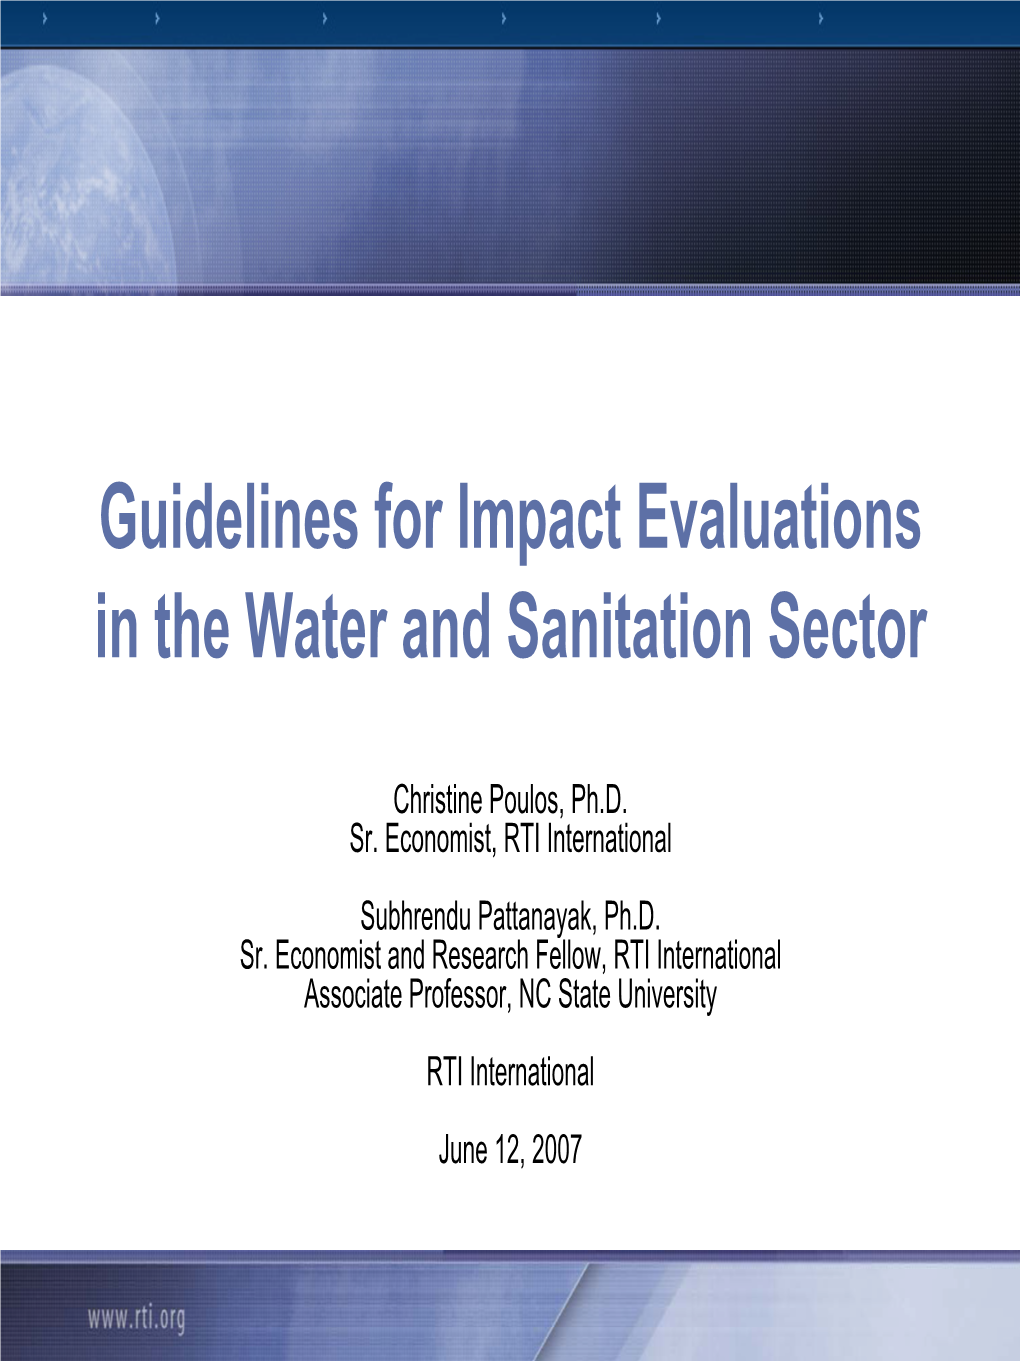 A Guide to Water and Sanitation Sector Impact Evaluations